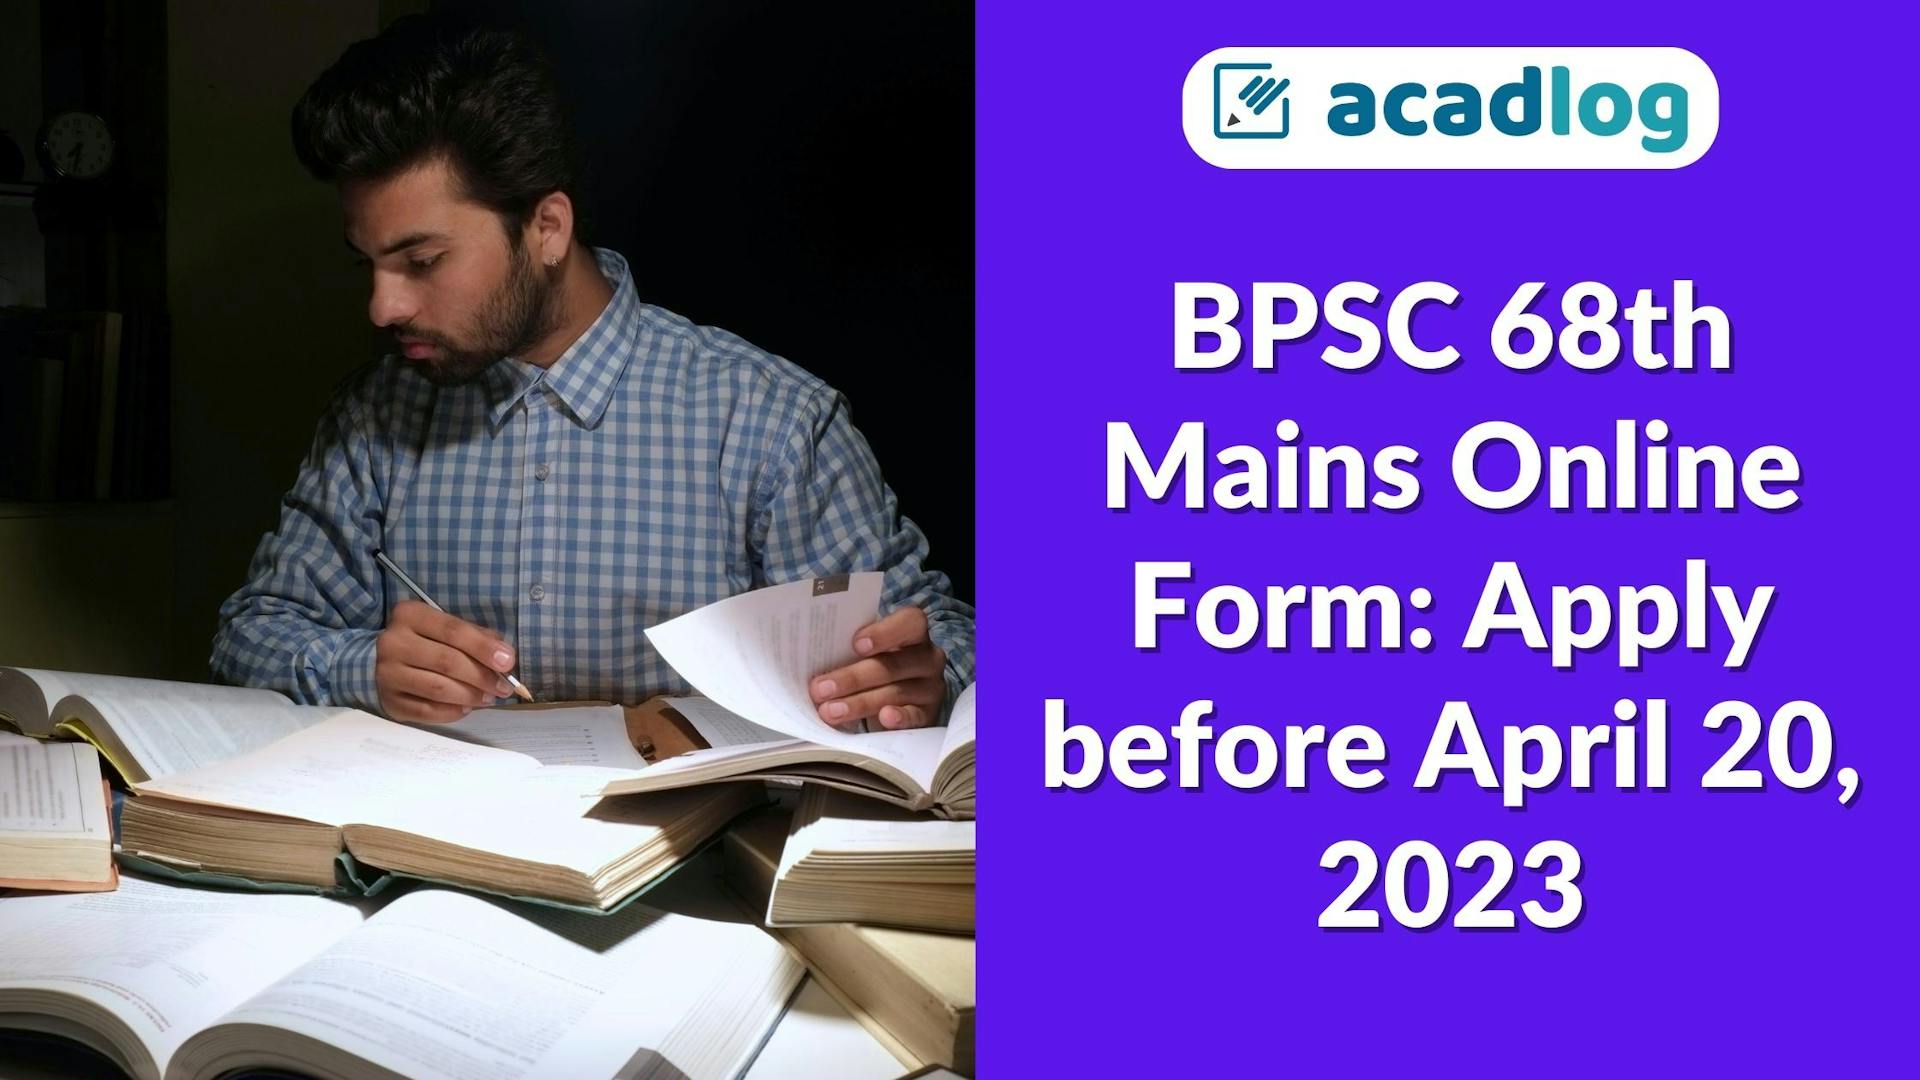 BPSC 68th Mains Online Form: Apply before April 20, 2023